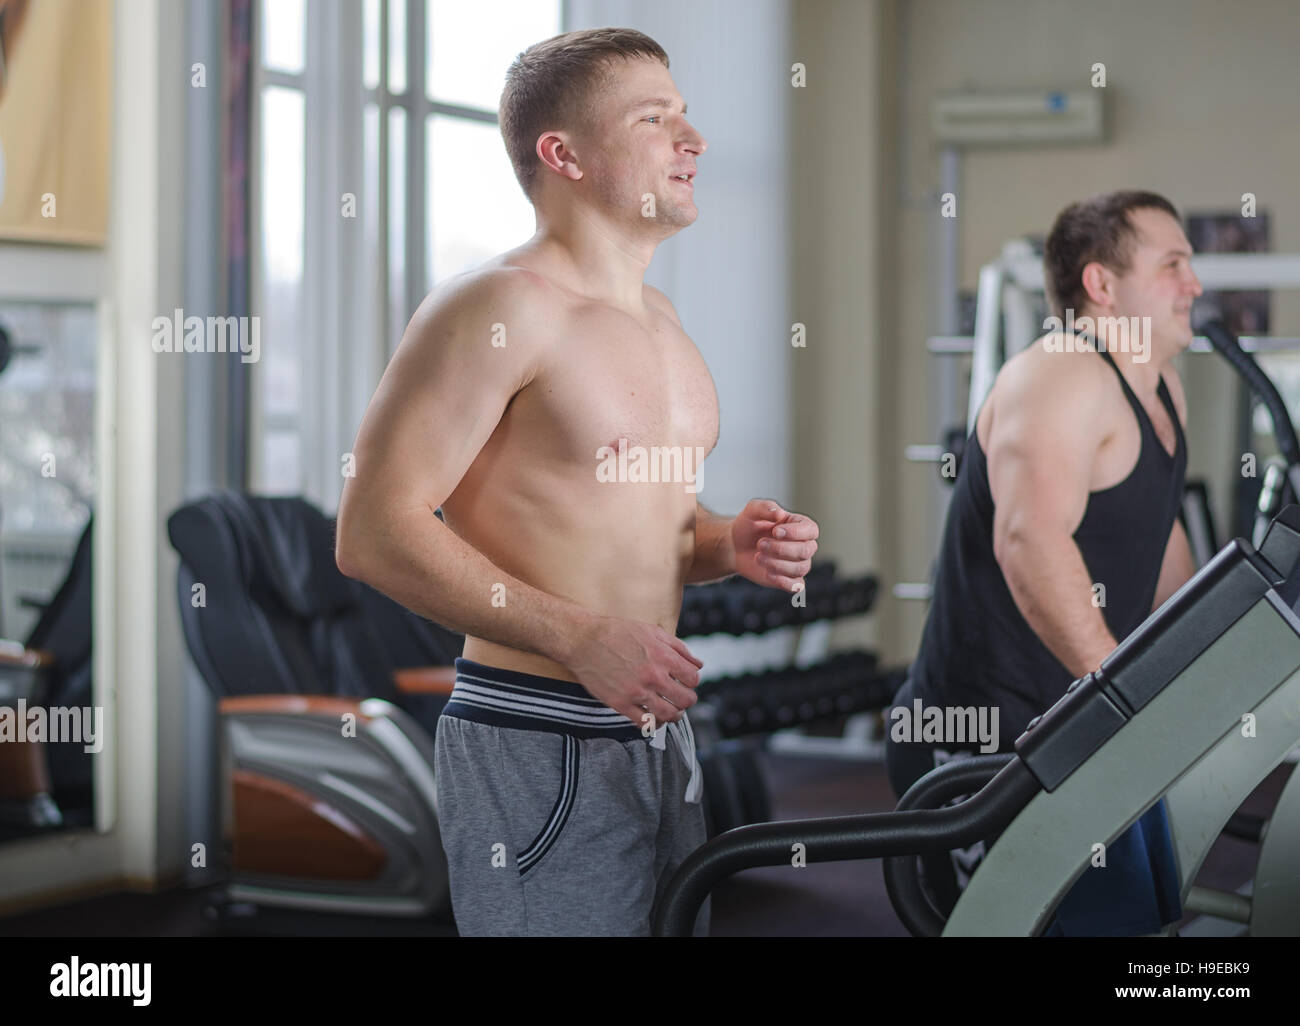 Two young athlete in the gym running on a treadmill Stock Photo